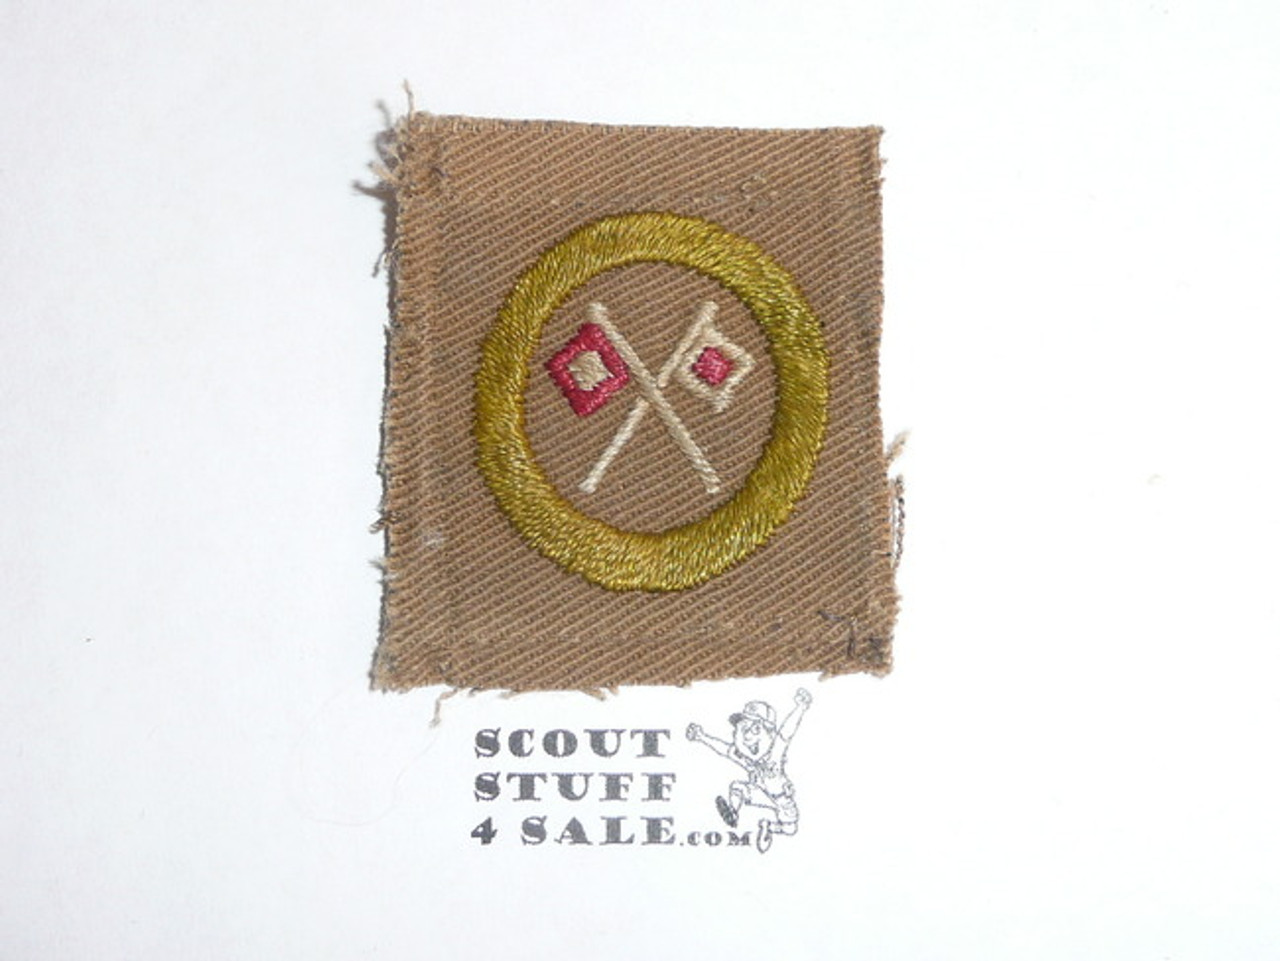 Signaling - Type A - Square Tan Merit Badge (1911-1933), reversed flags, black striped back, used